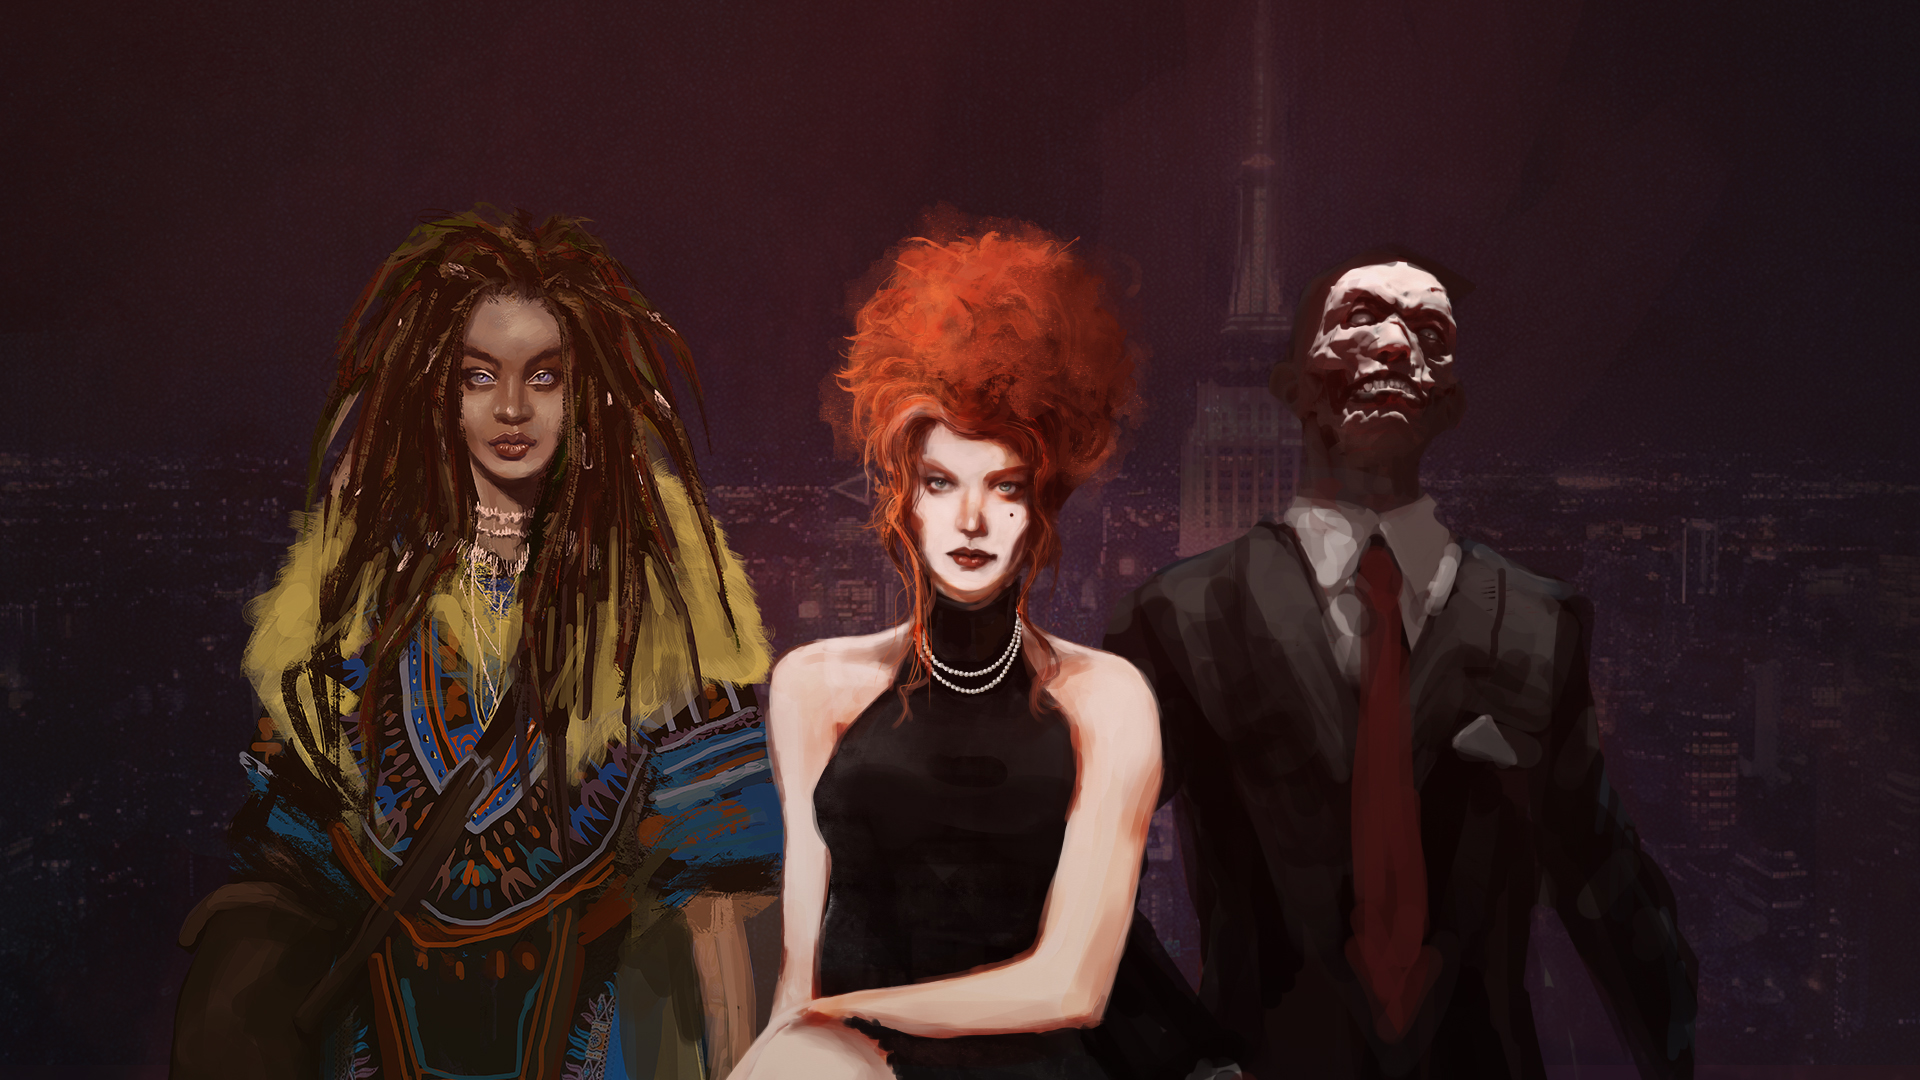 Vampire: The Masquerade – Coteries of New York / Characters - TV Tropes